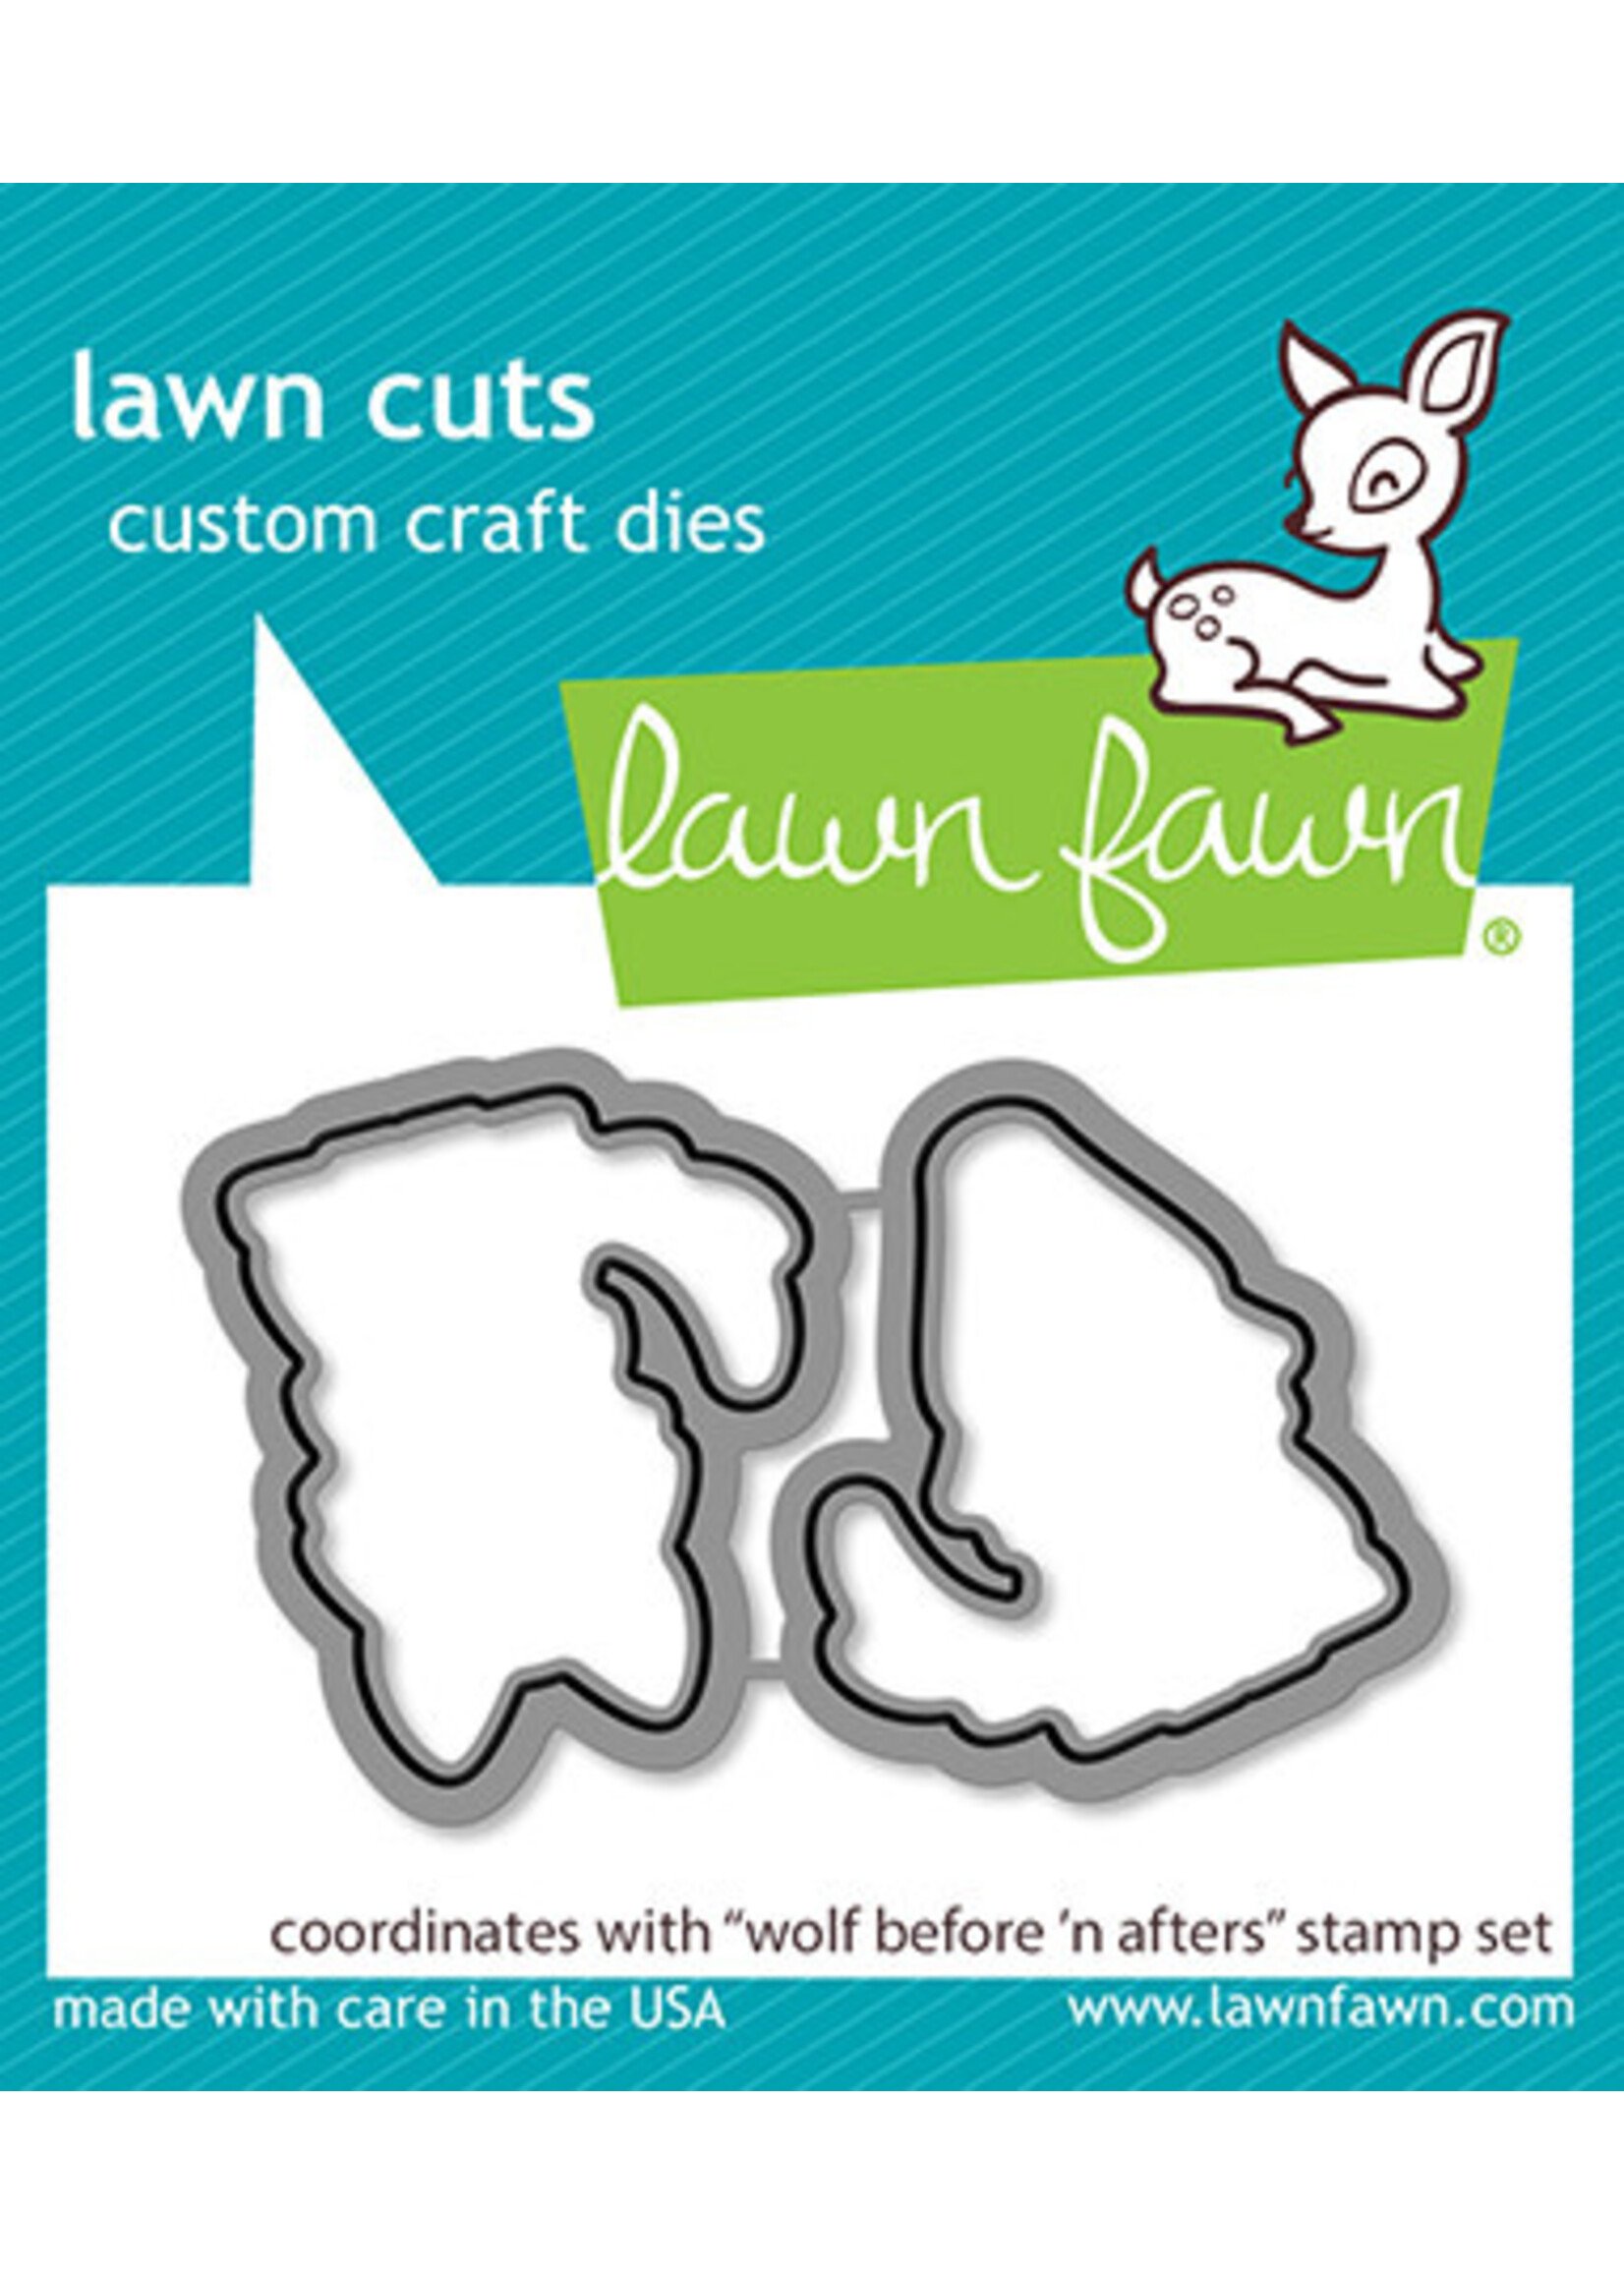 Lawn Fawn wolf before 'n afters lawn cuts die